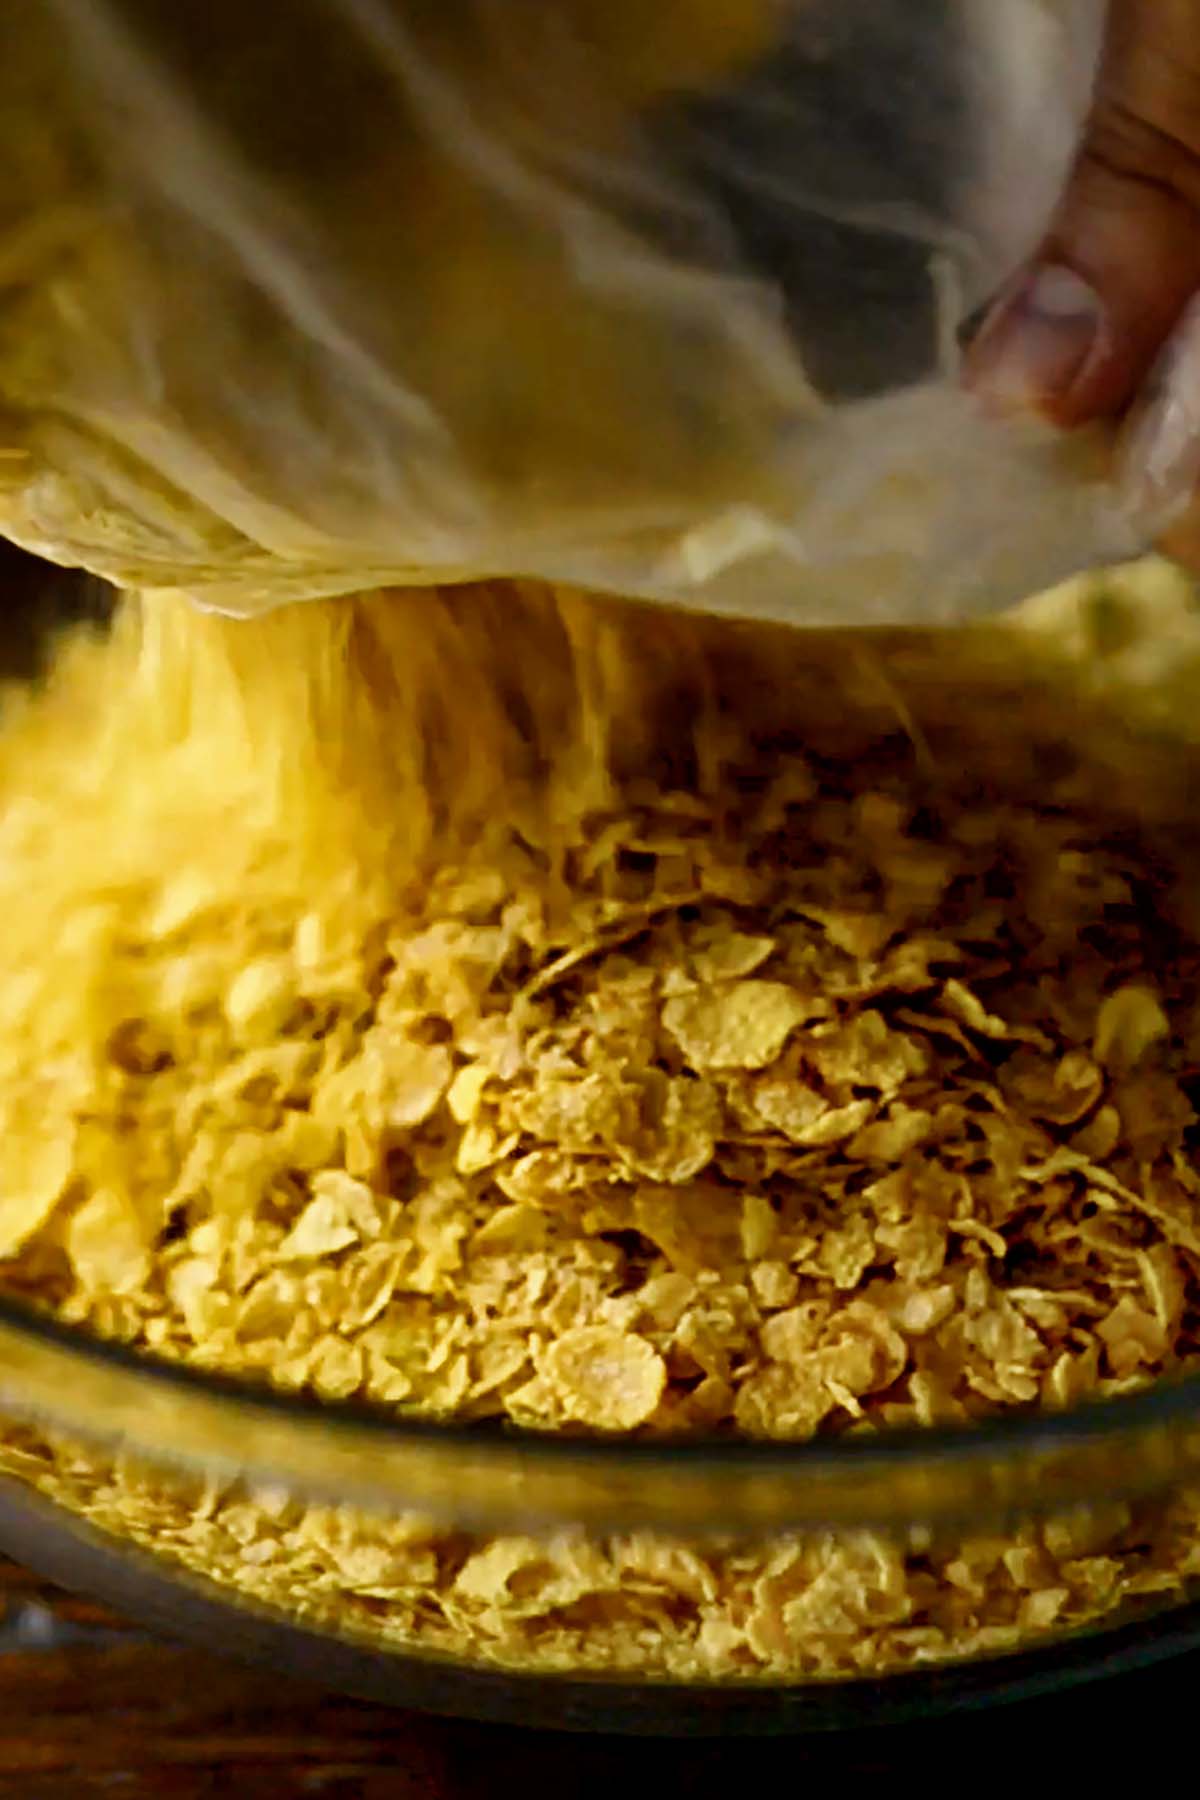 Corn flakes being poured into a glass mixing bowl.